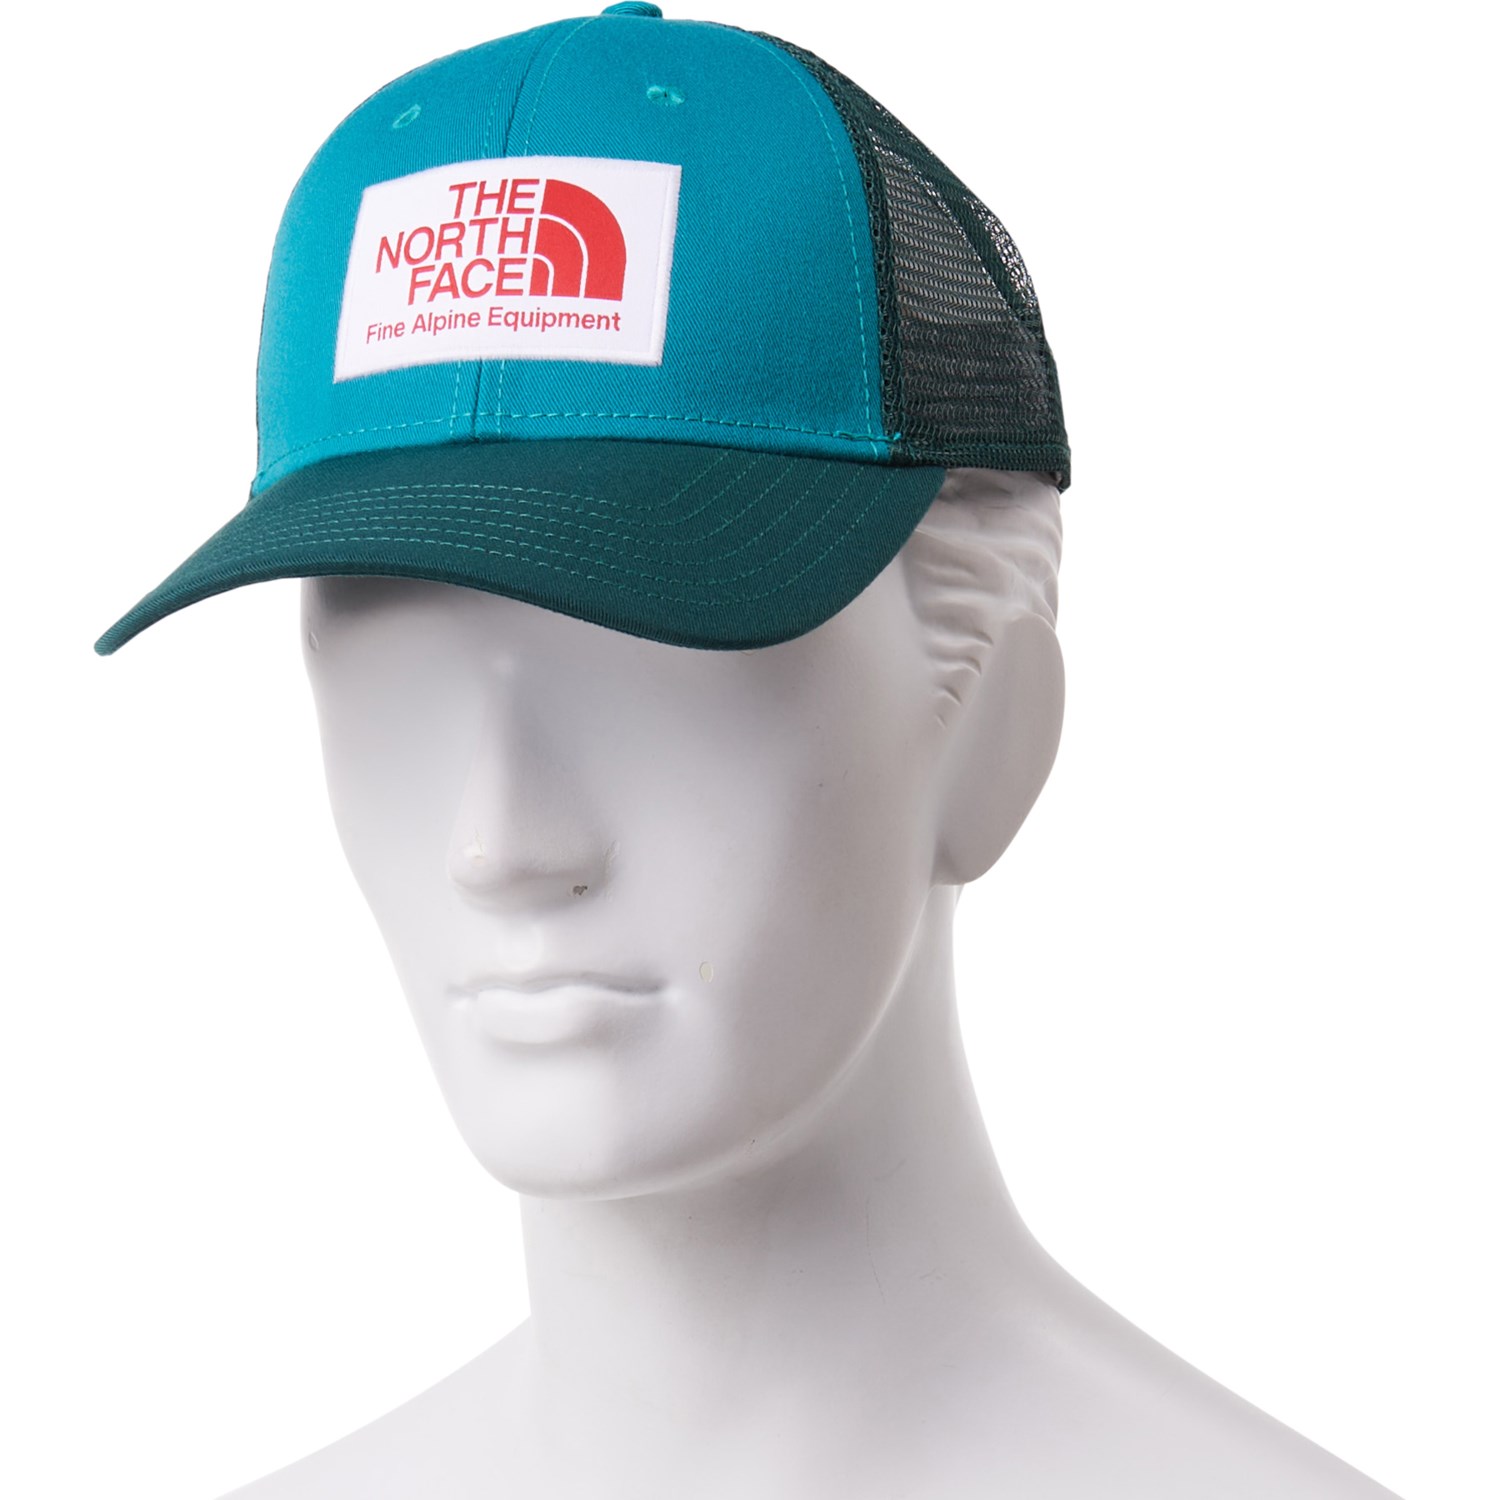 The North Face Mudder Trucker Hat (For Men)